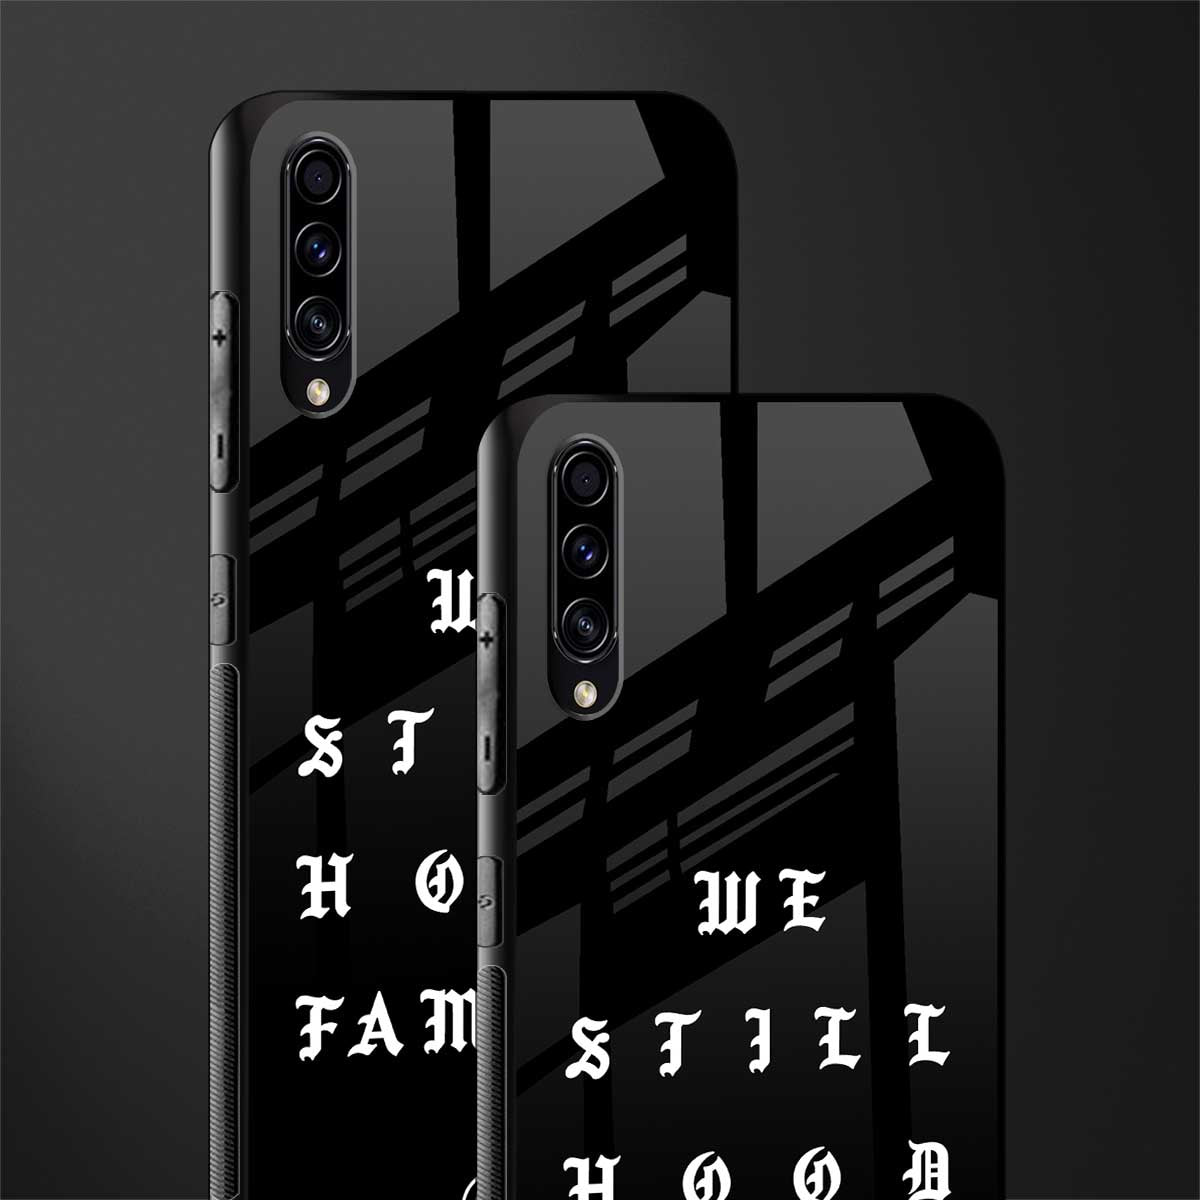 hood famous phone cover for samsung galaxy a50s